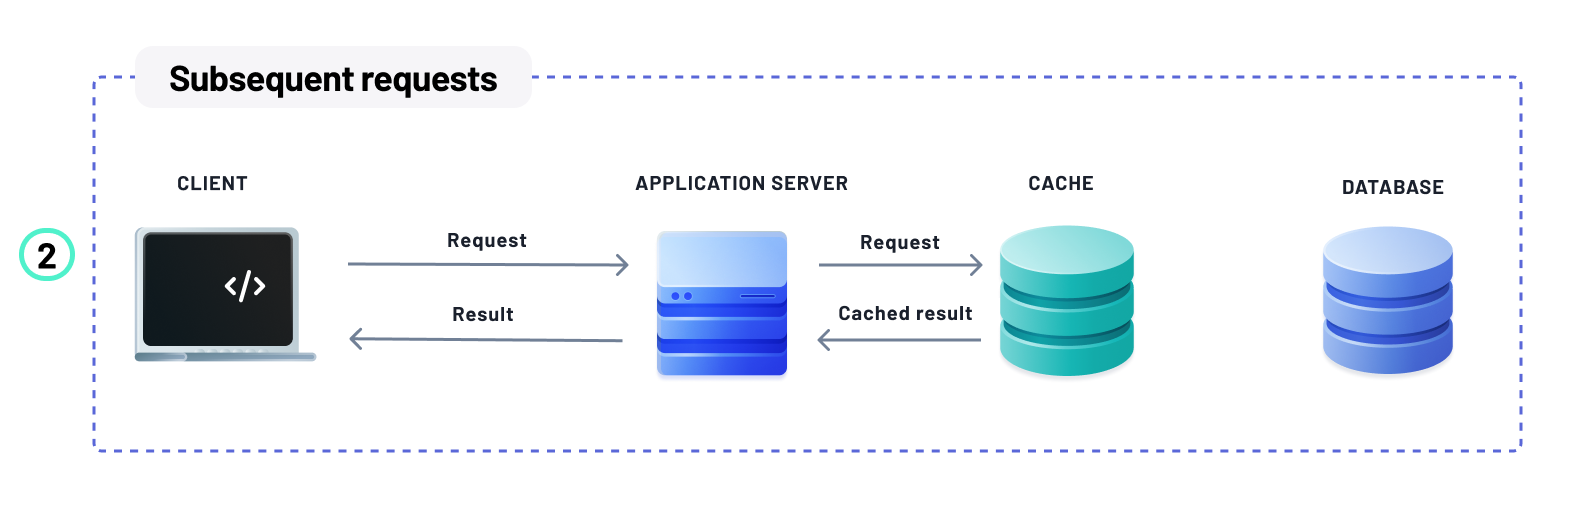 Request response lifecycle with cache